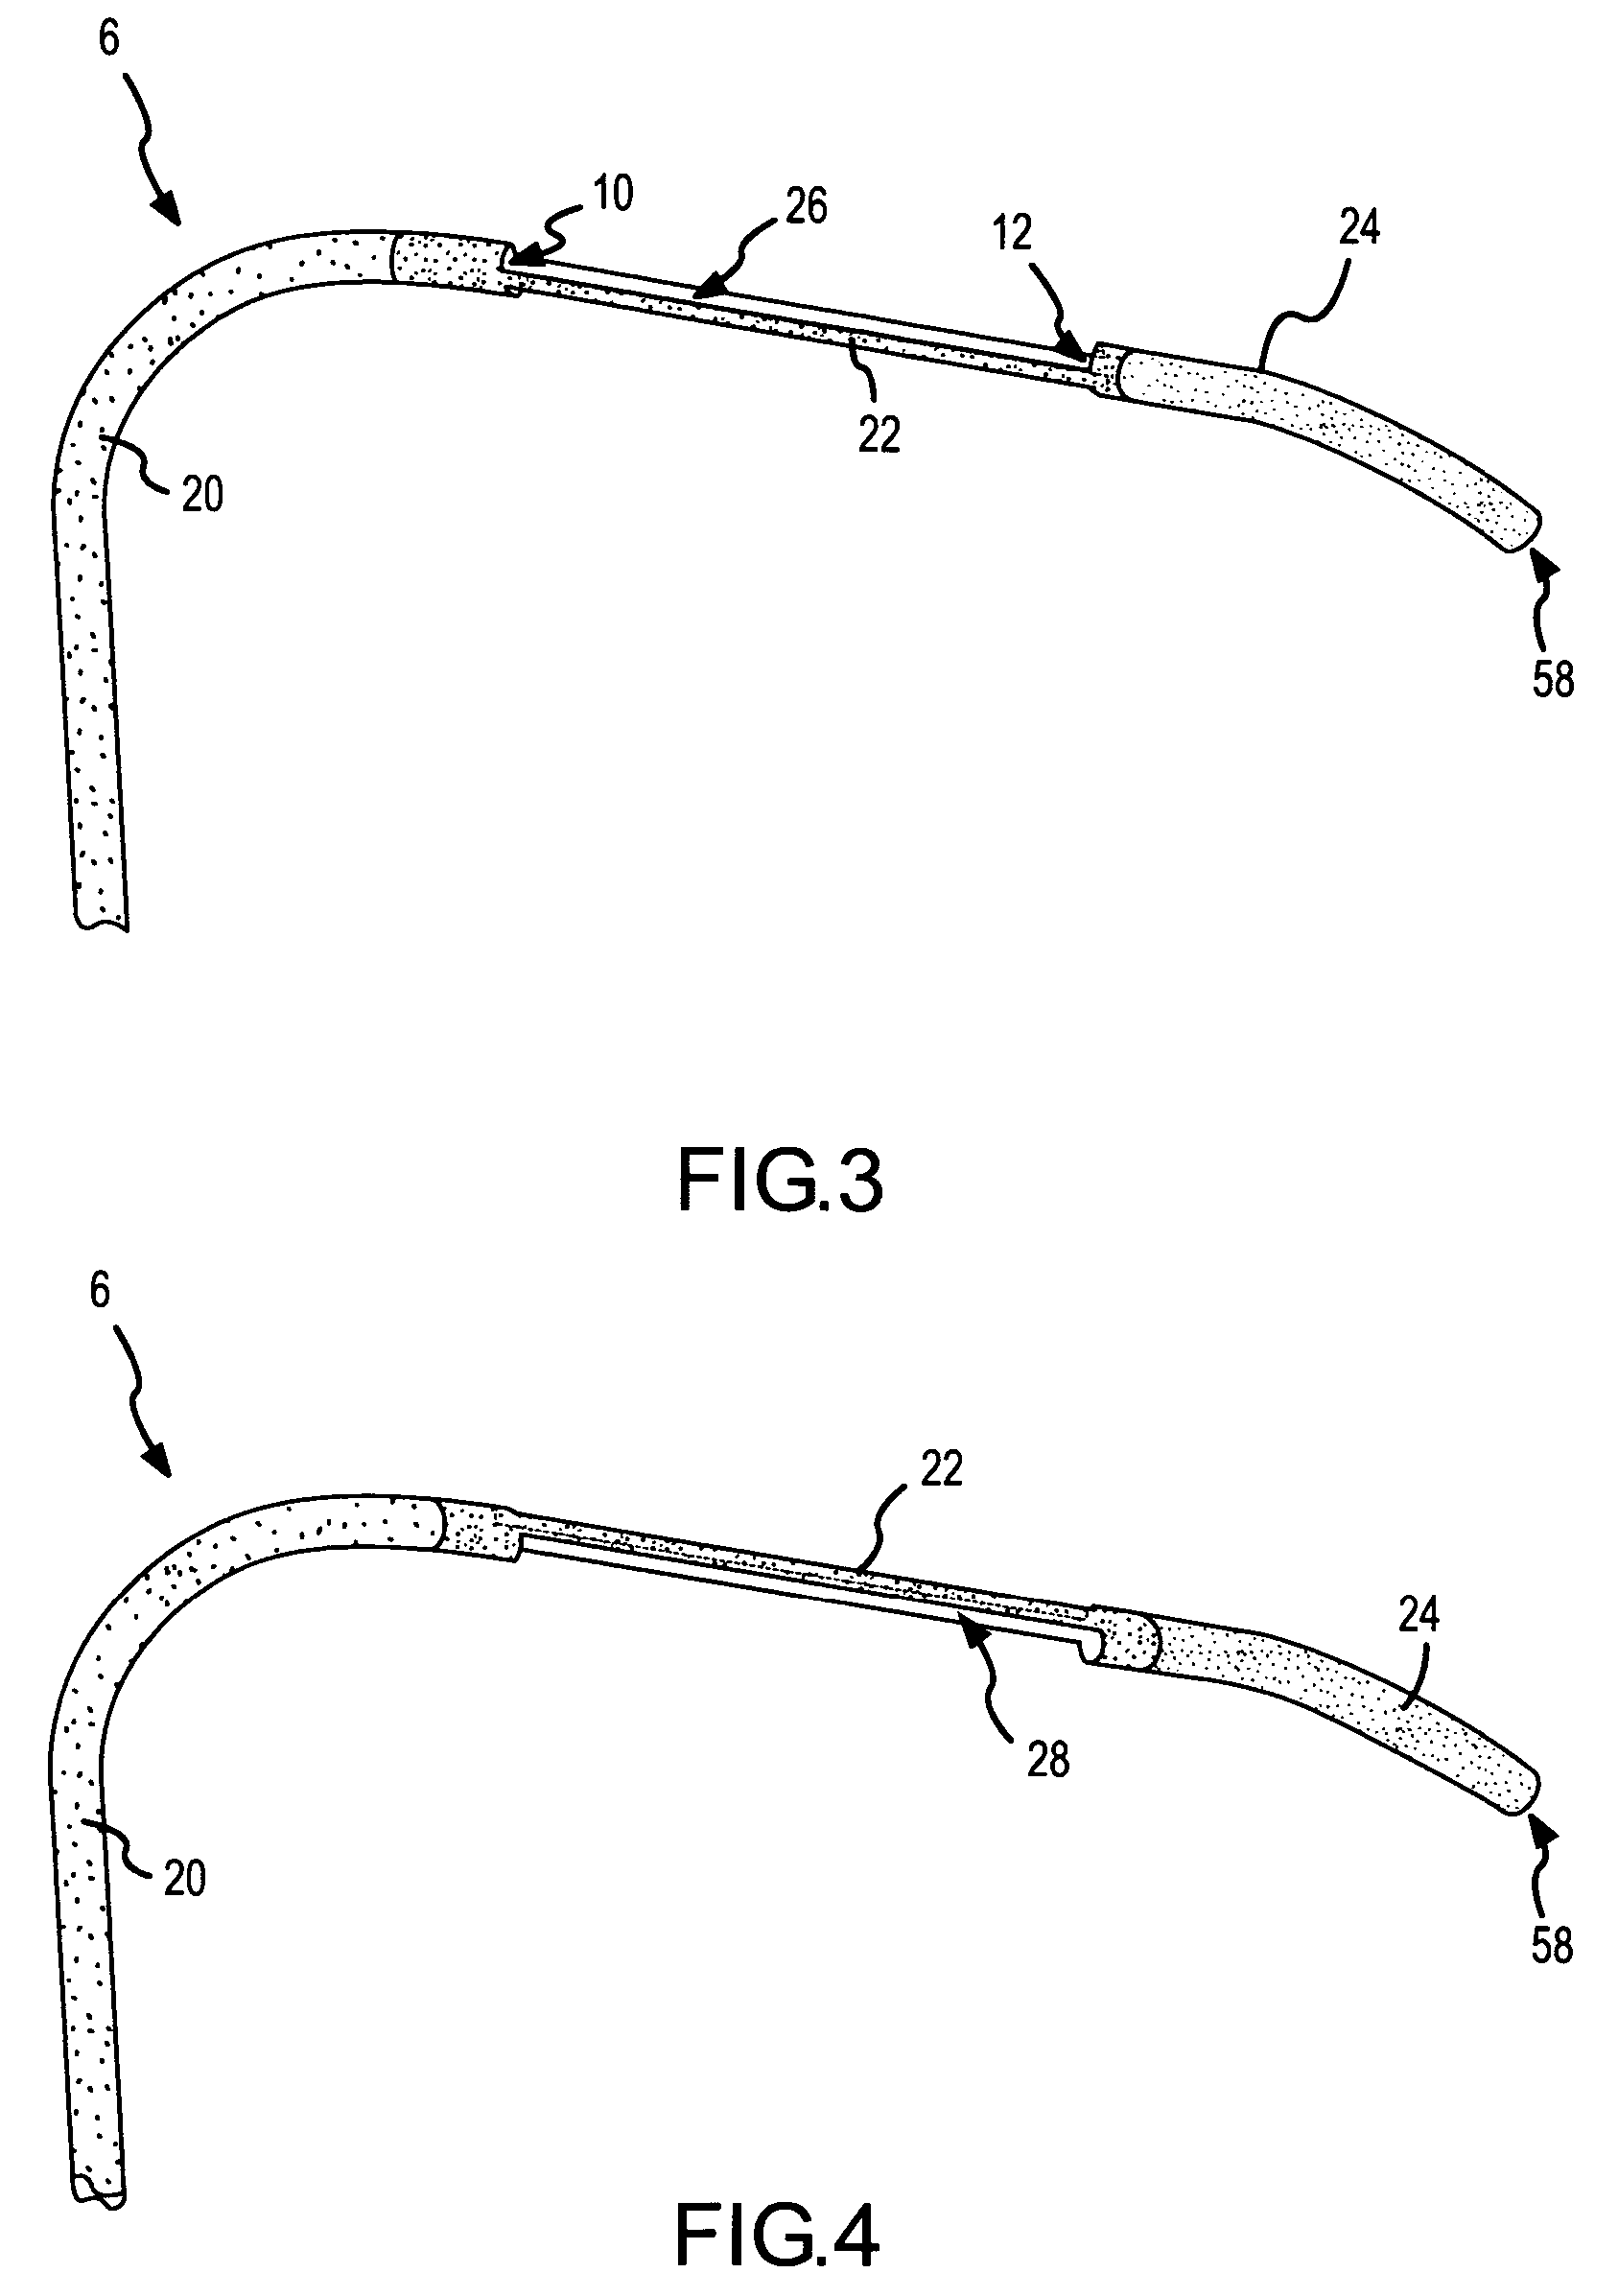 Ablation catheter with suspension system incorporating rigid and flexible components